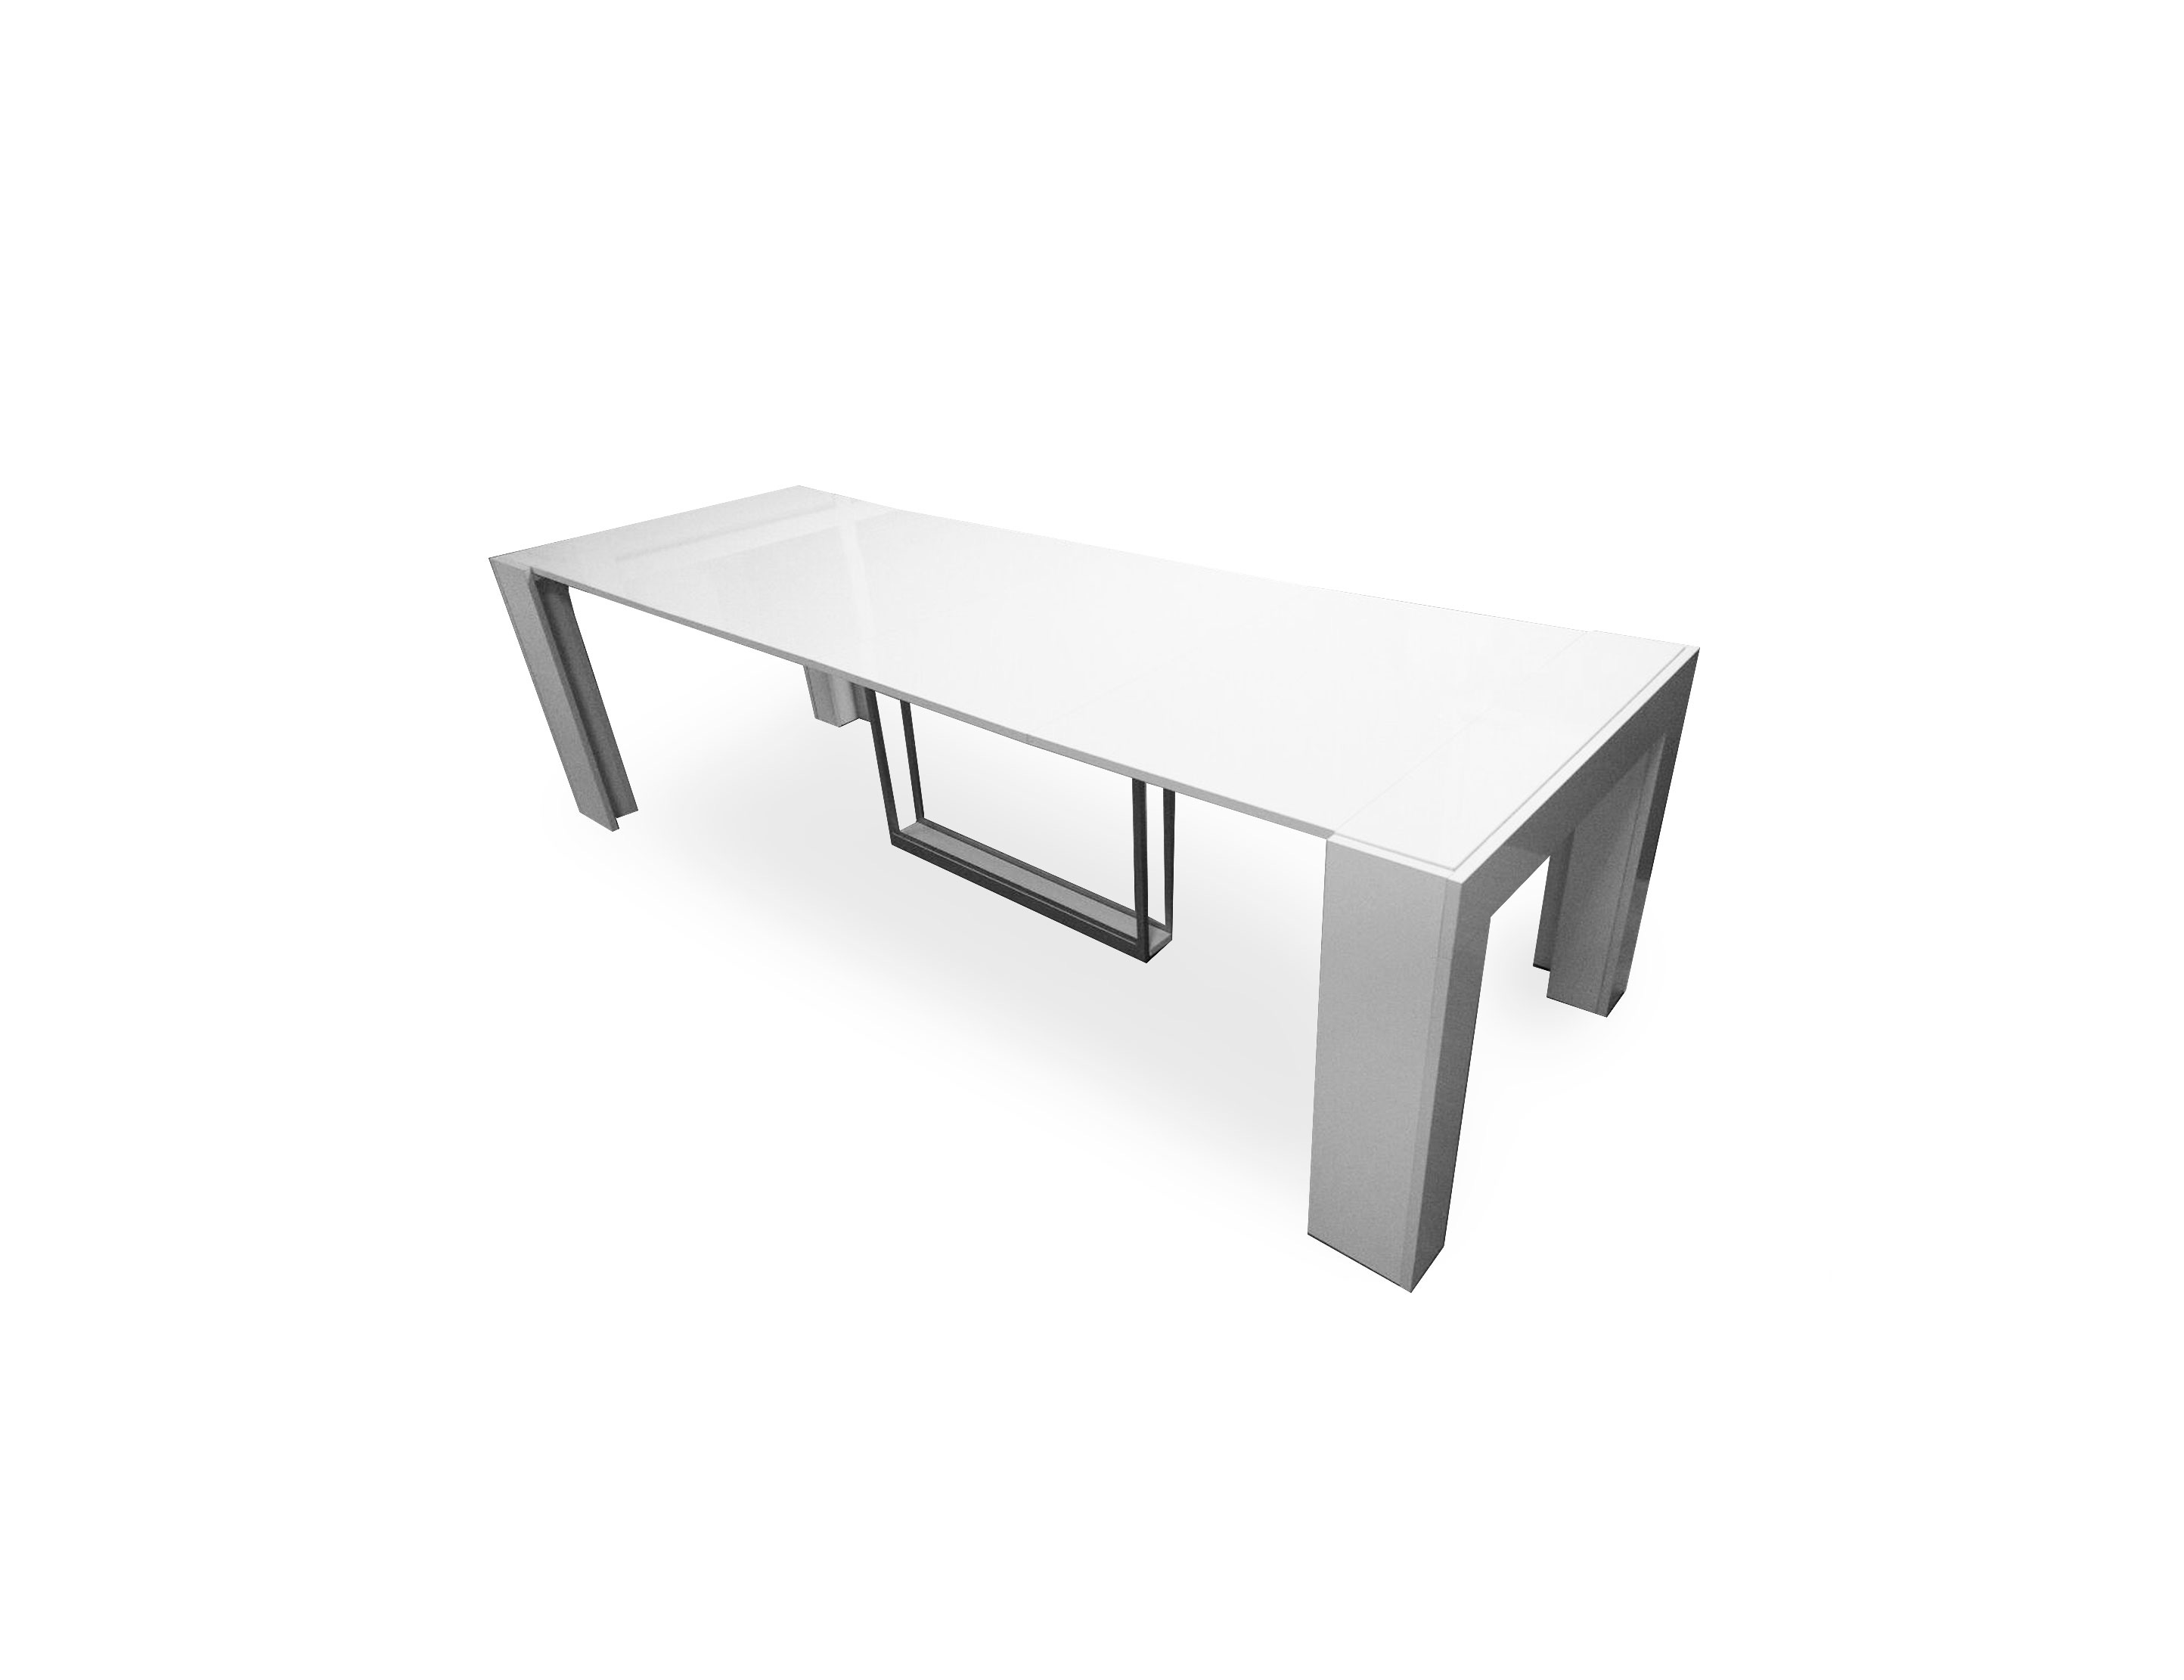 https://expandfurniture.com/wp-content/uploads/2017/06/Cubist-Table-with-built-in-Extension-Storage-1.jpg